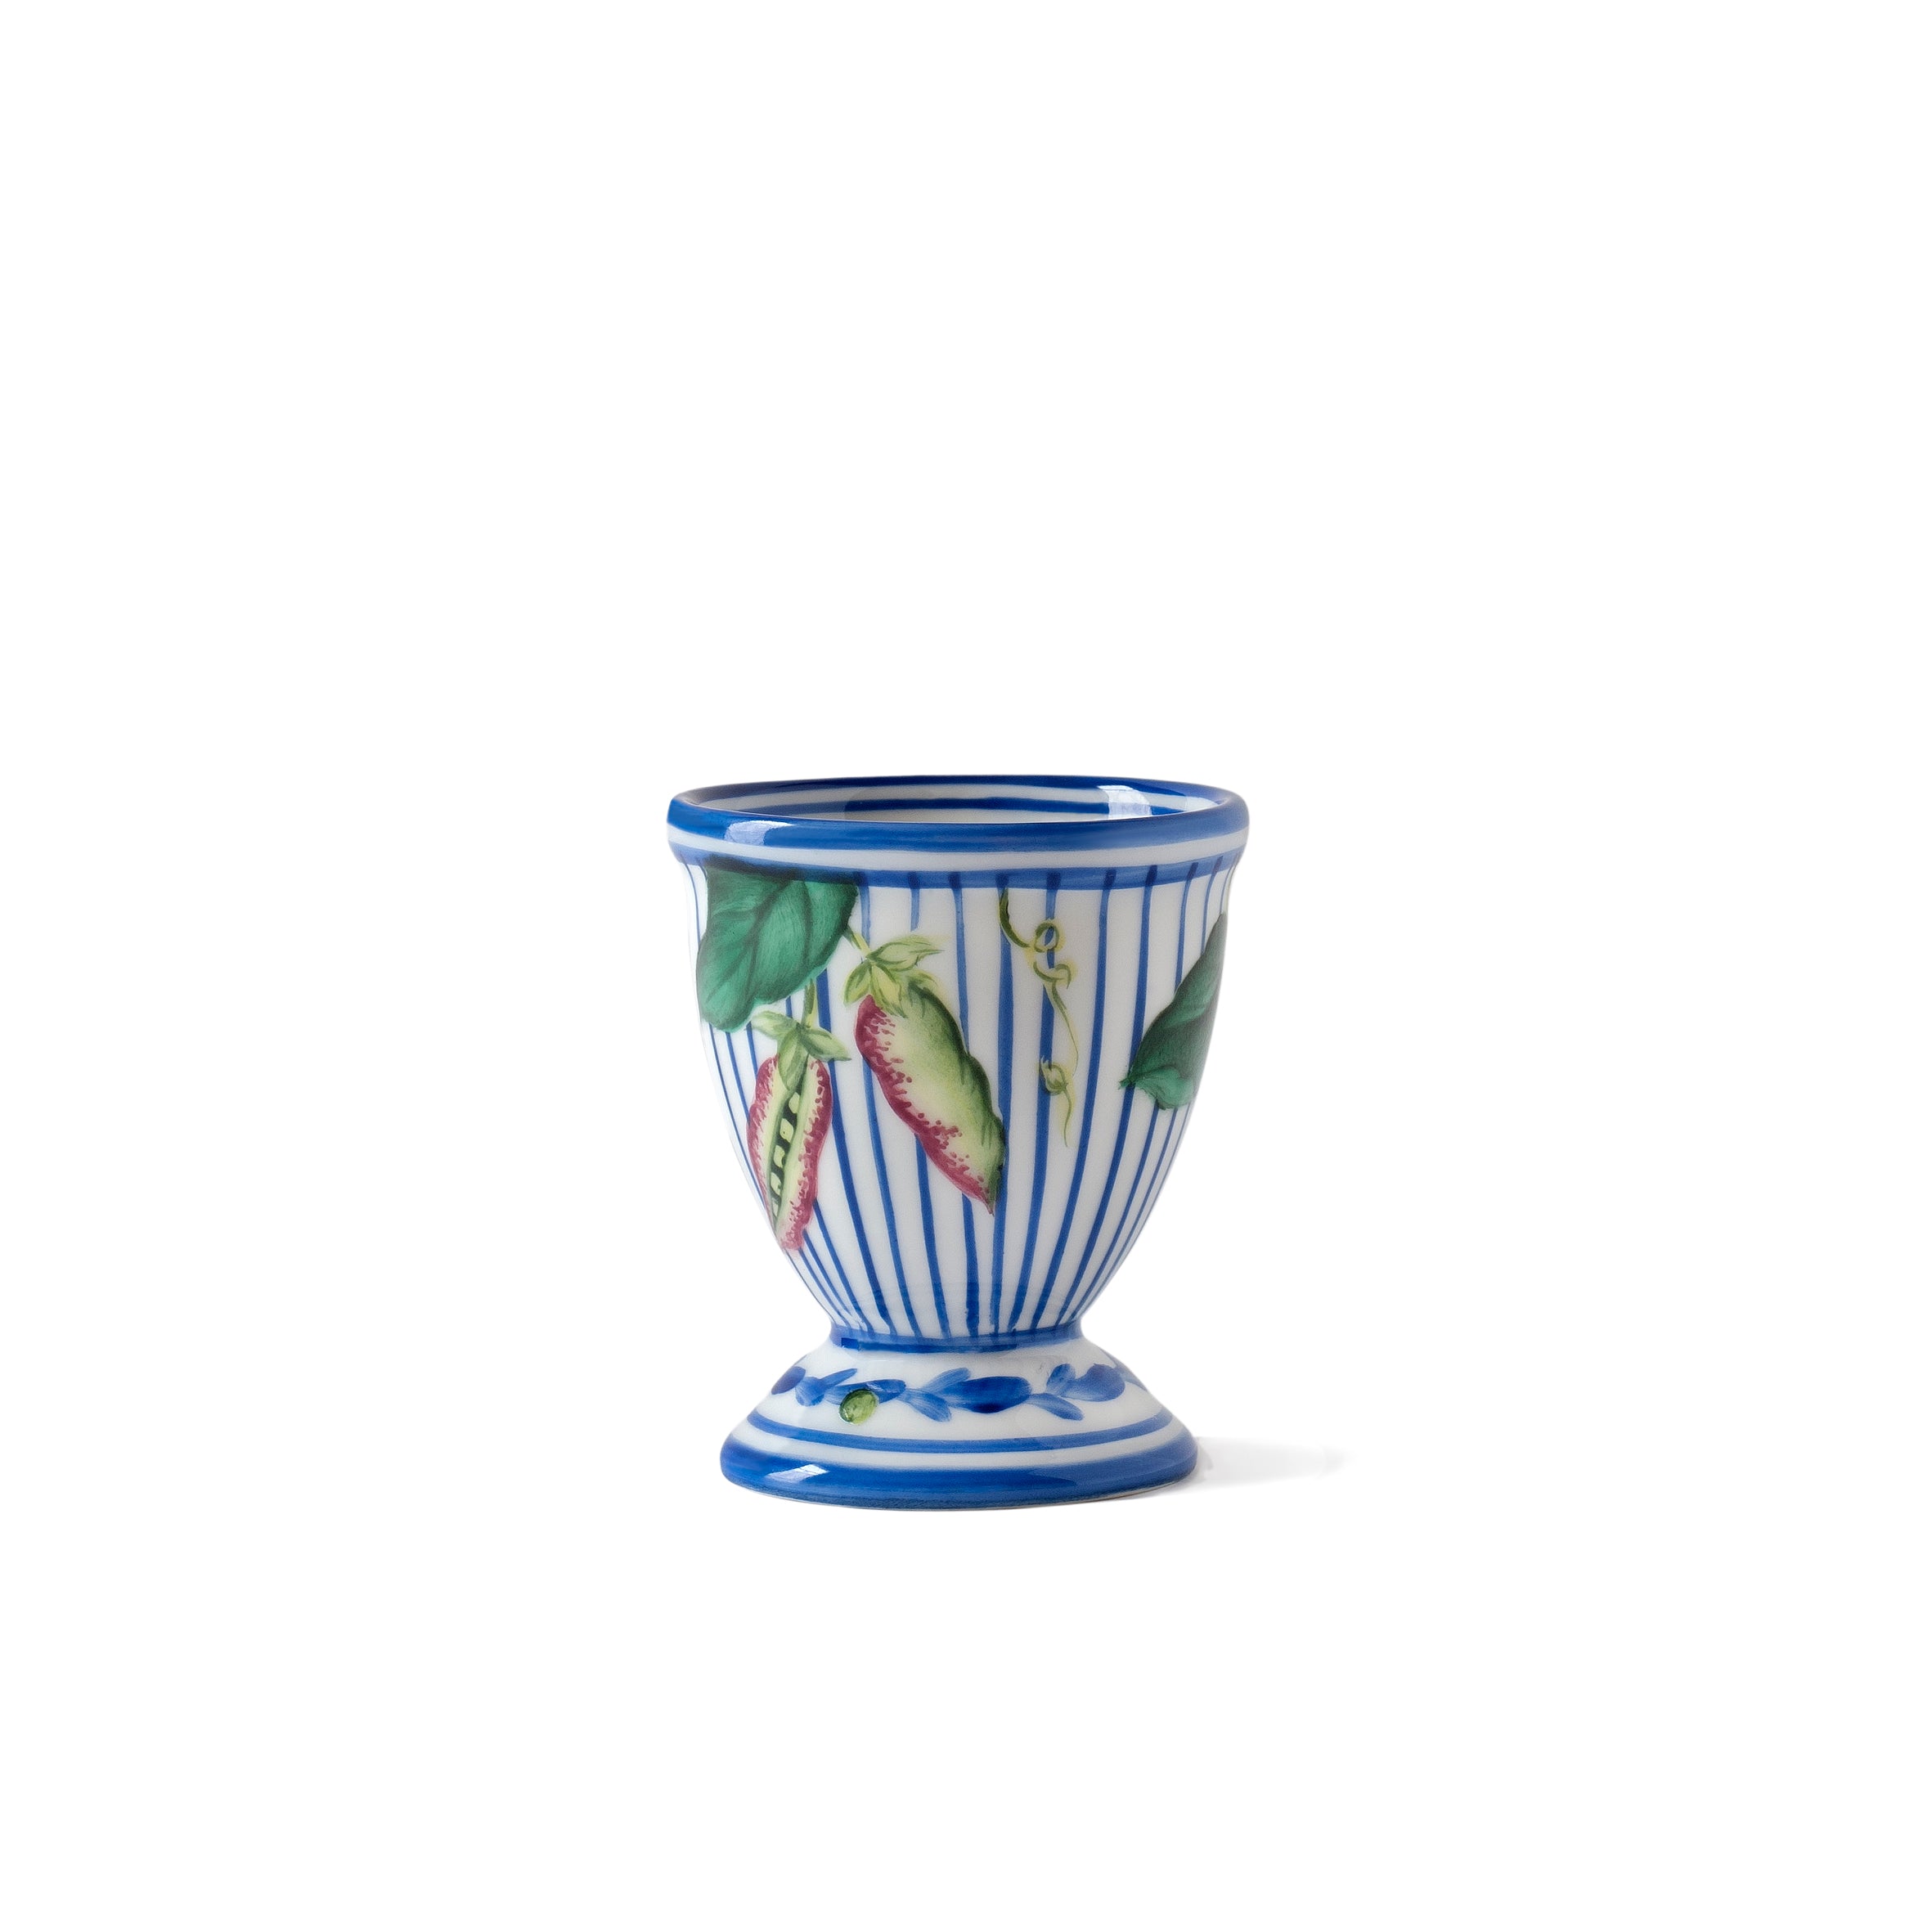 Potager in Blue - Egg cup
